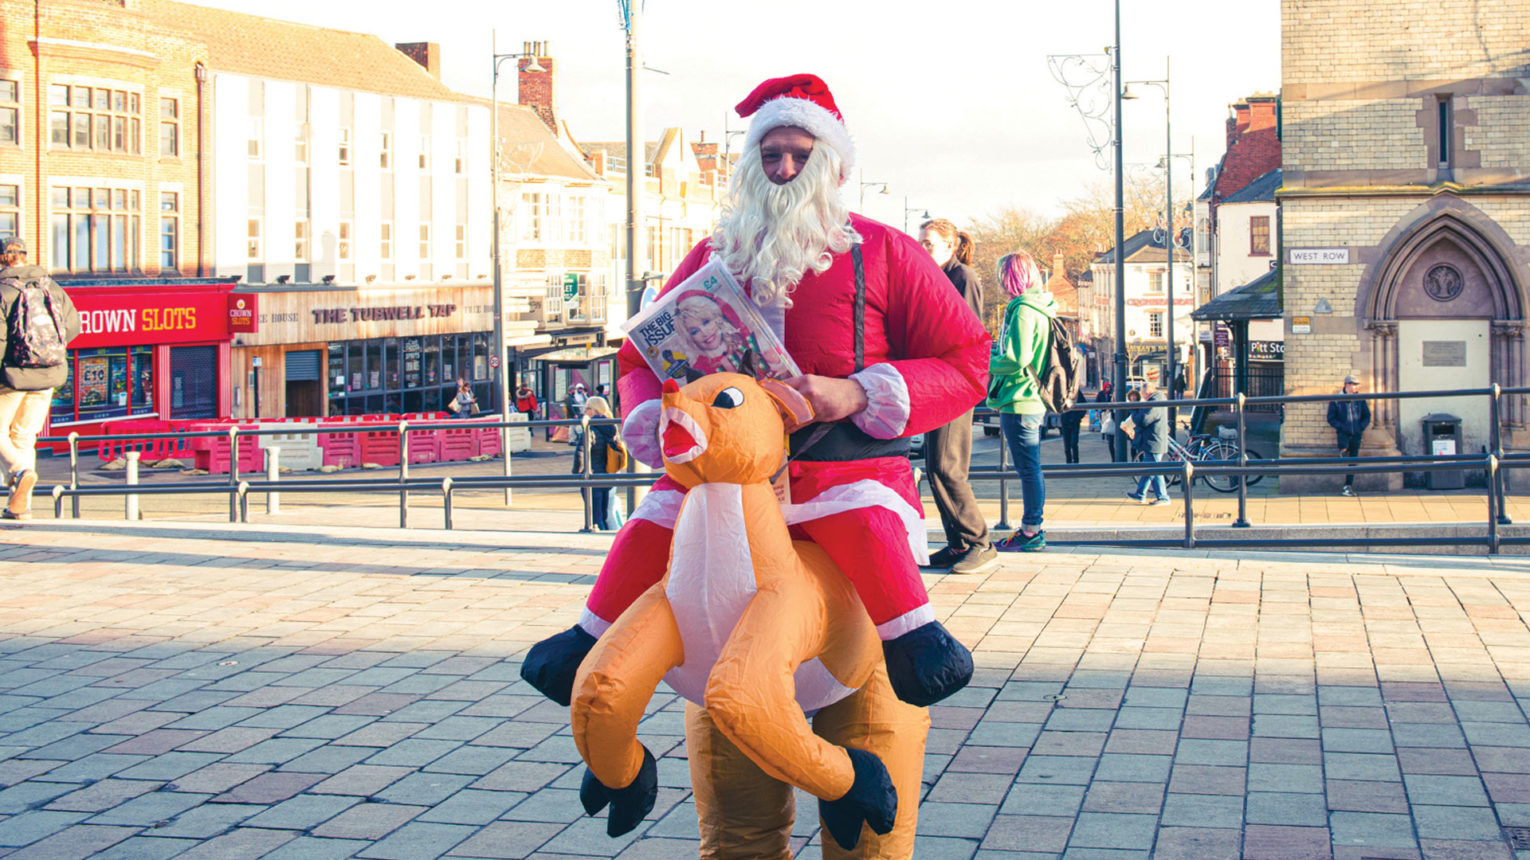 Darlington vendor Peter Cowles has taken the role of a Santa on his pitch